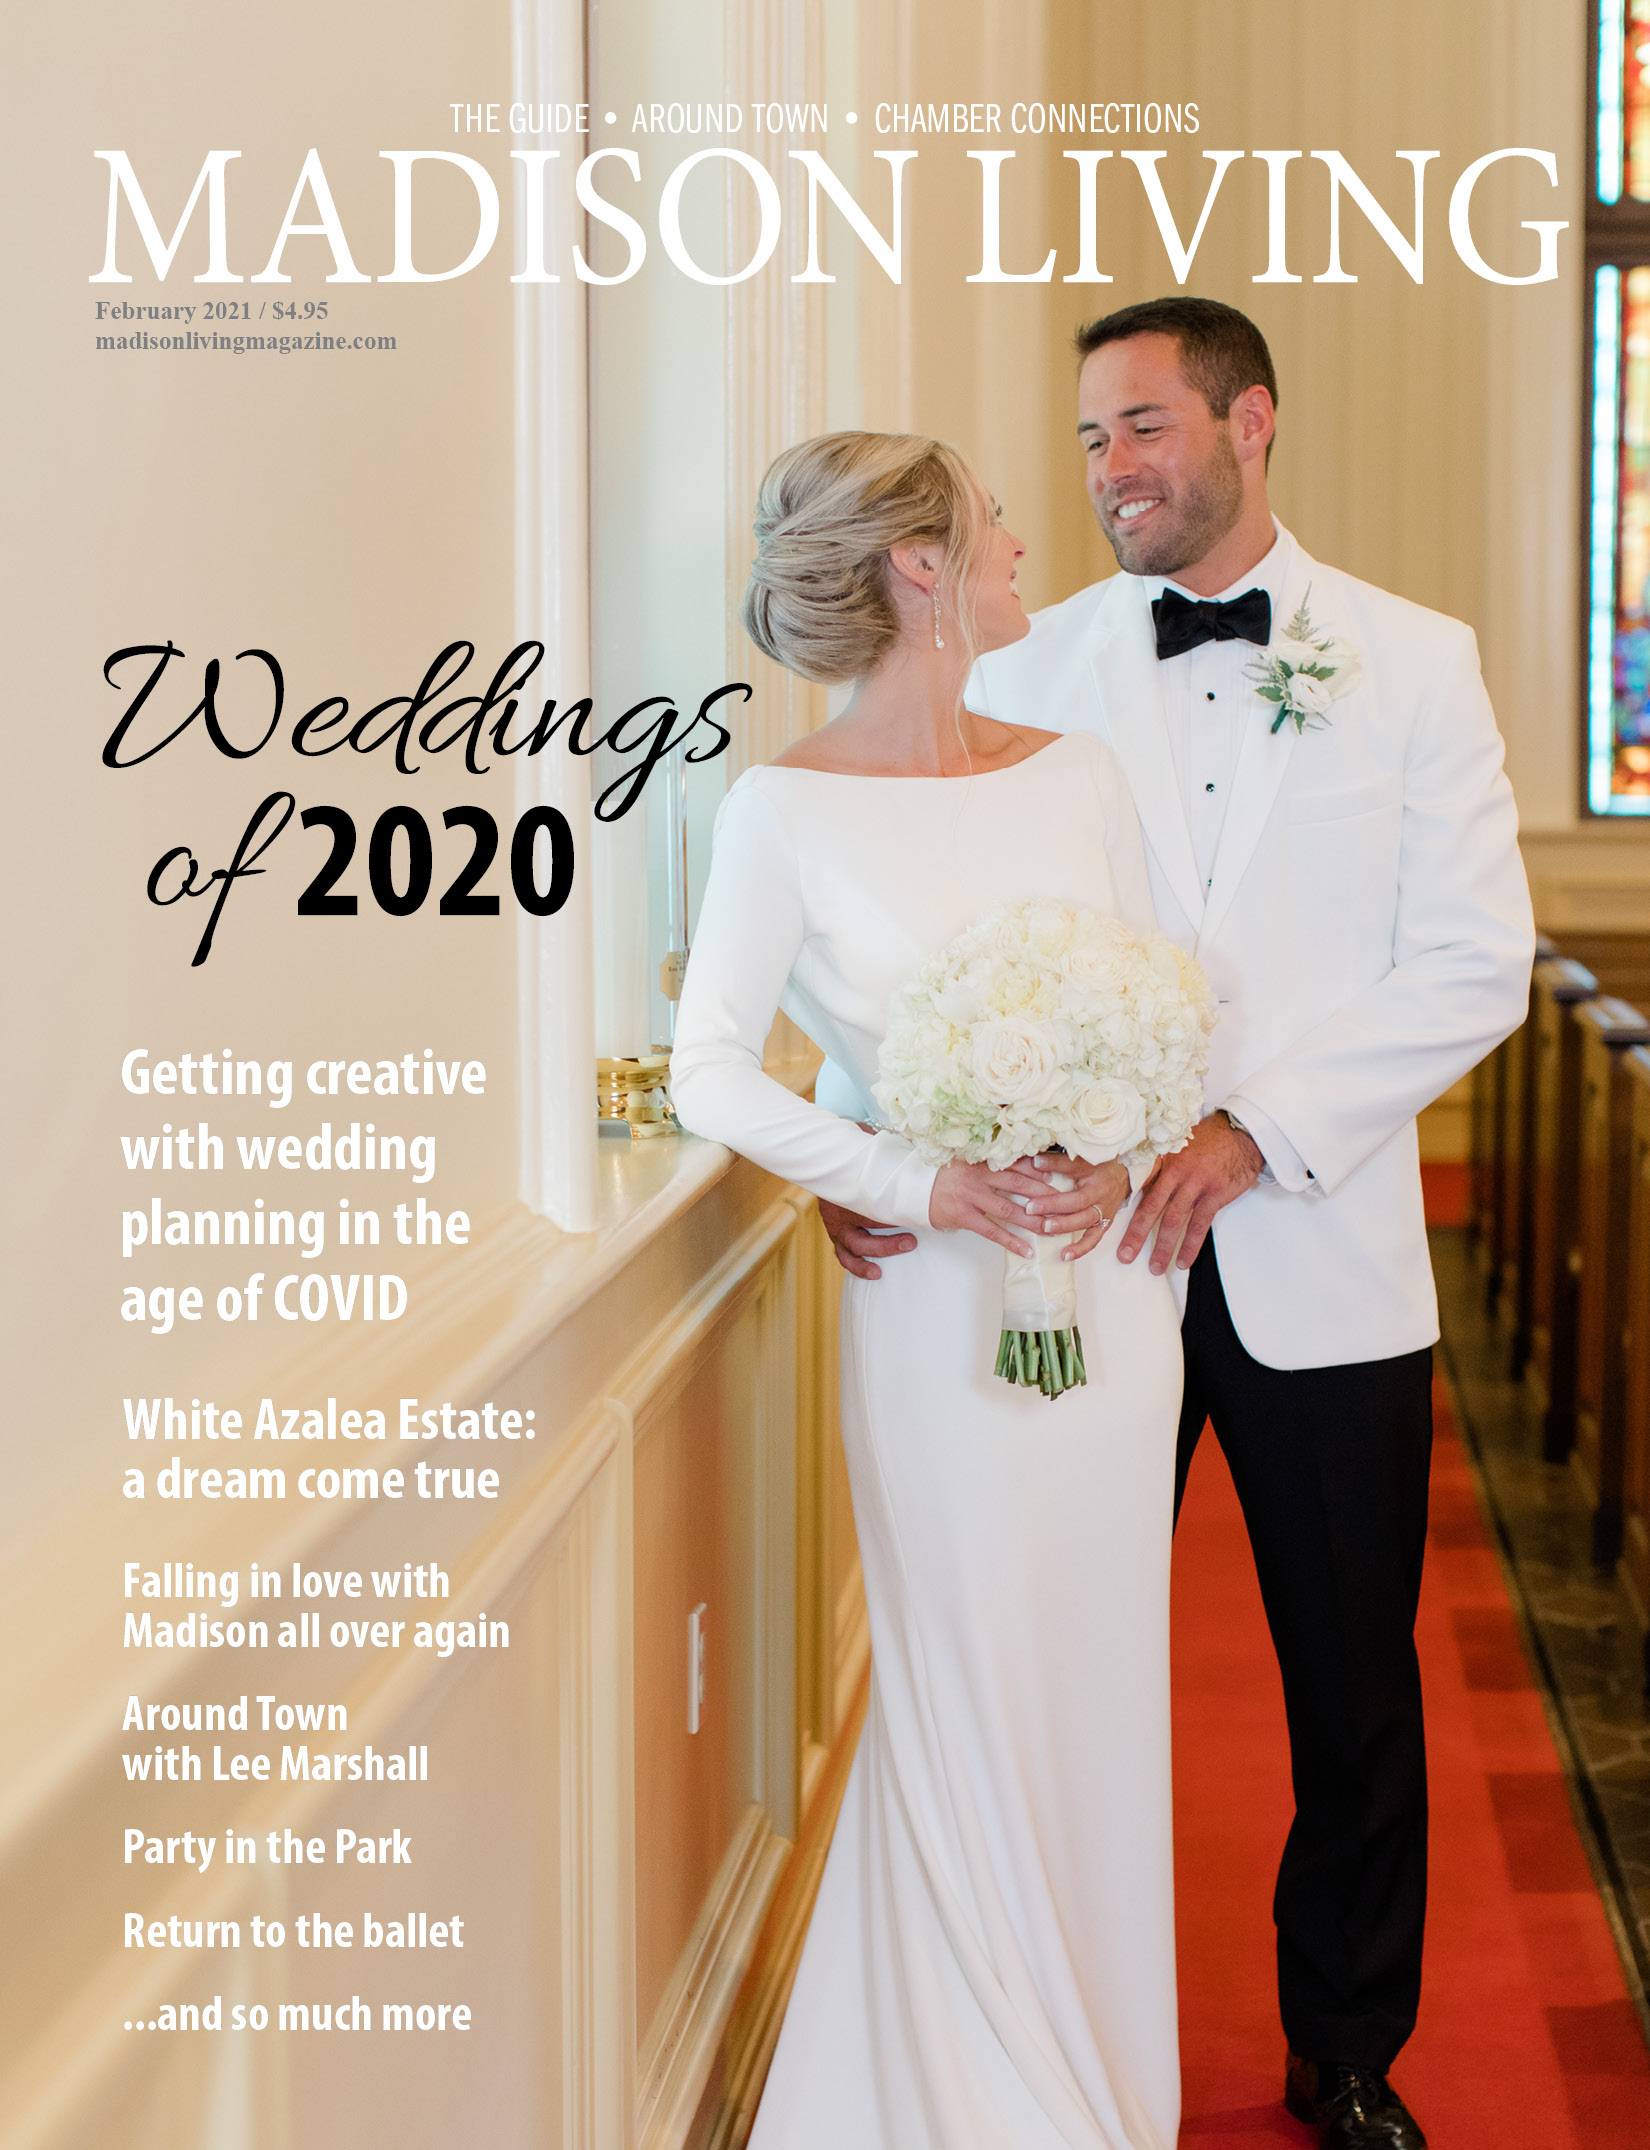 Click here for past issues of Madison Living Magazine